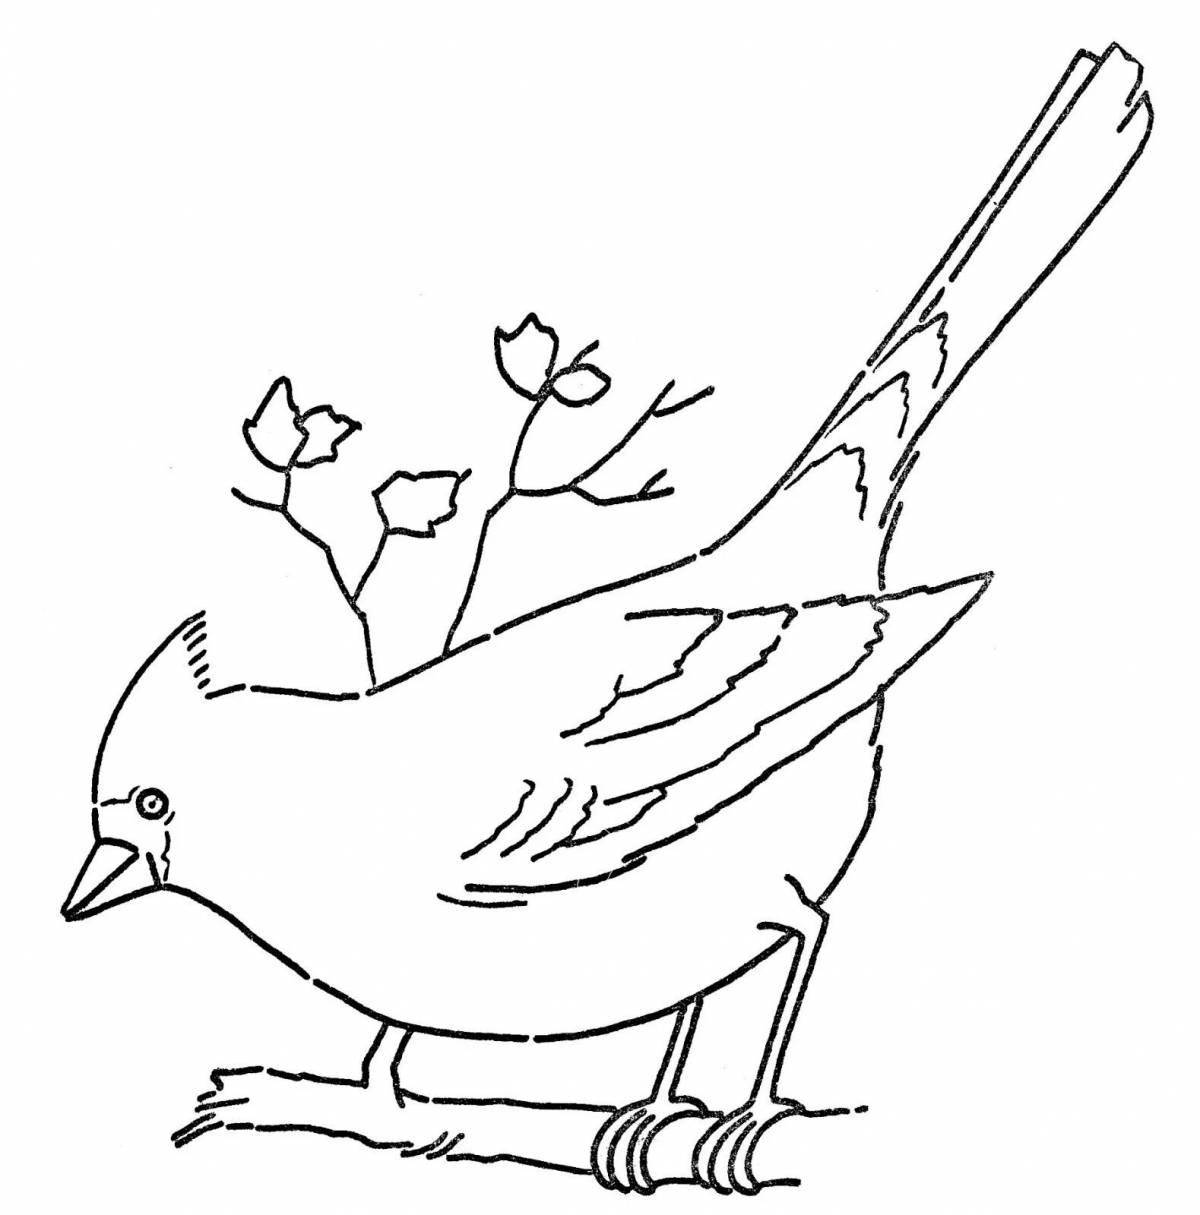 Palace winter birds coloring page